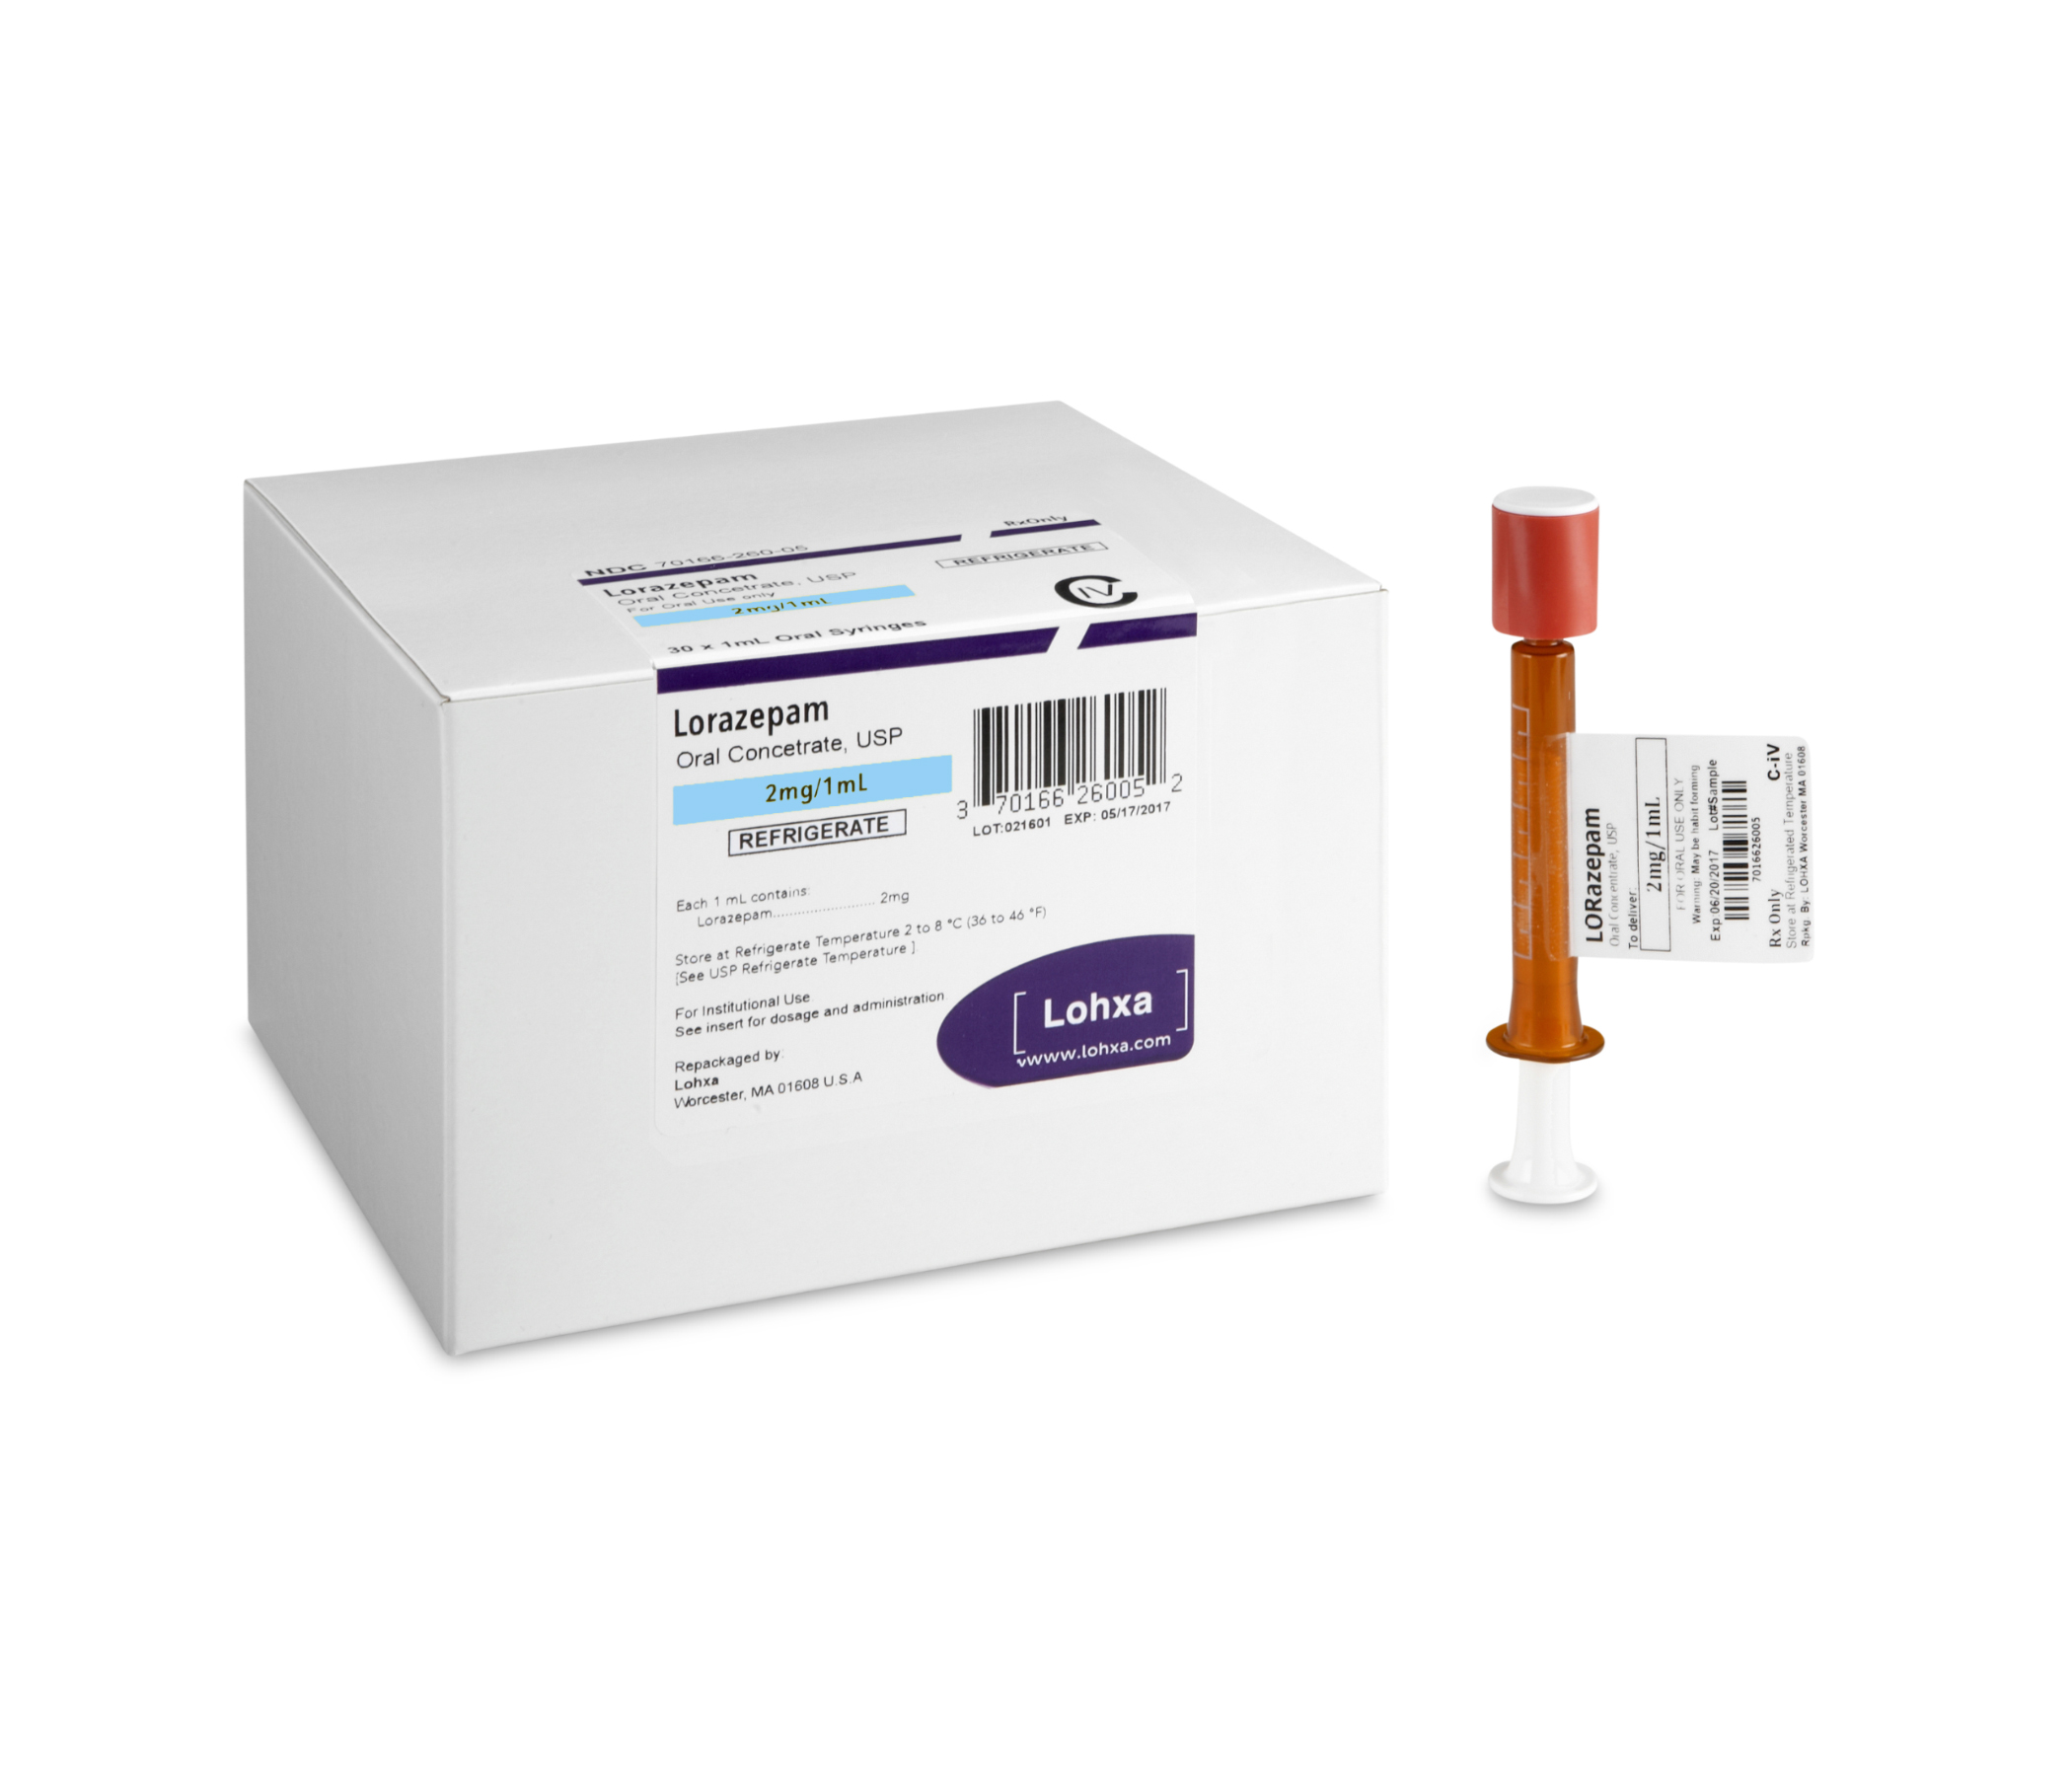 2mg/ml oral concentrate lorazepam